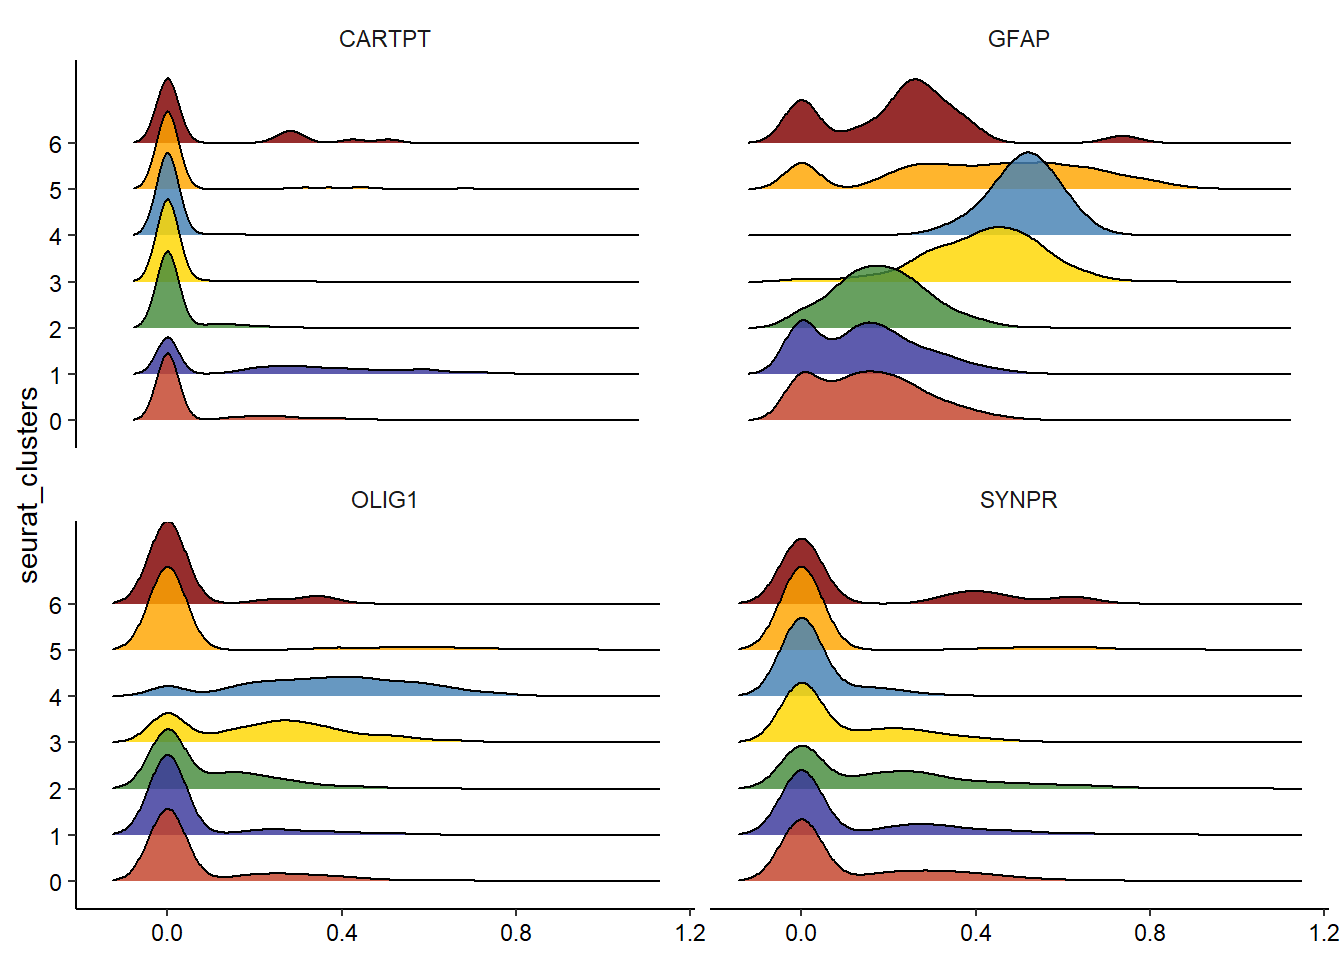 Figure 2.4. Display variable-distribution across categorical subgruops